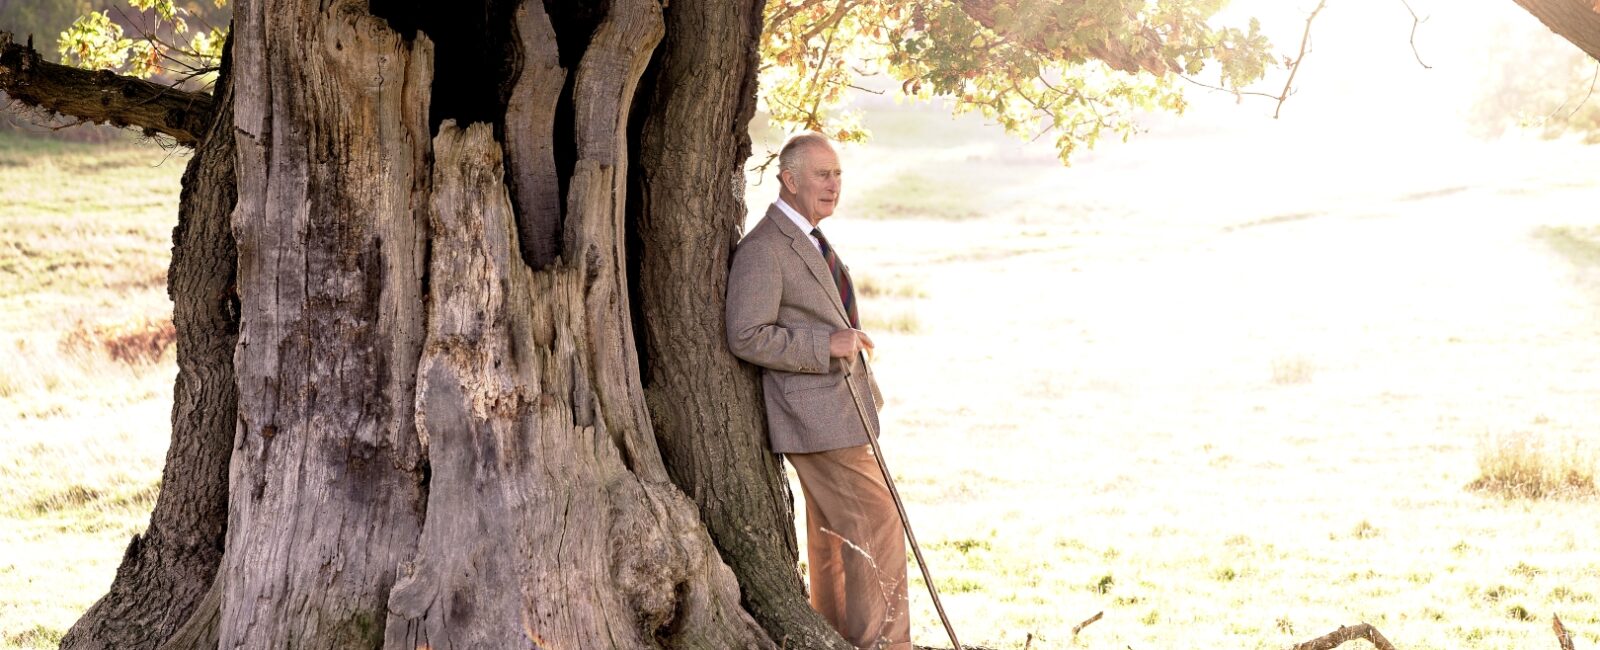 His Majesty the King leaning against an old oak tree in Windsor Great Park